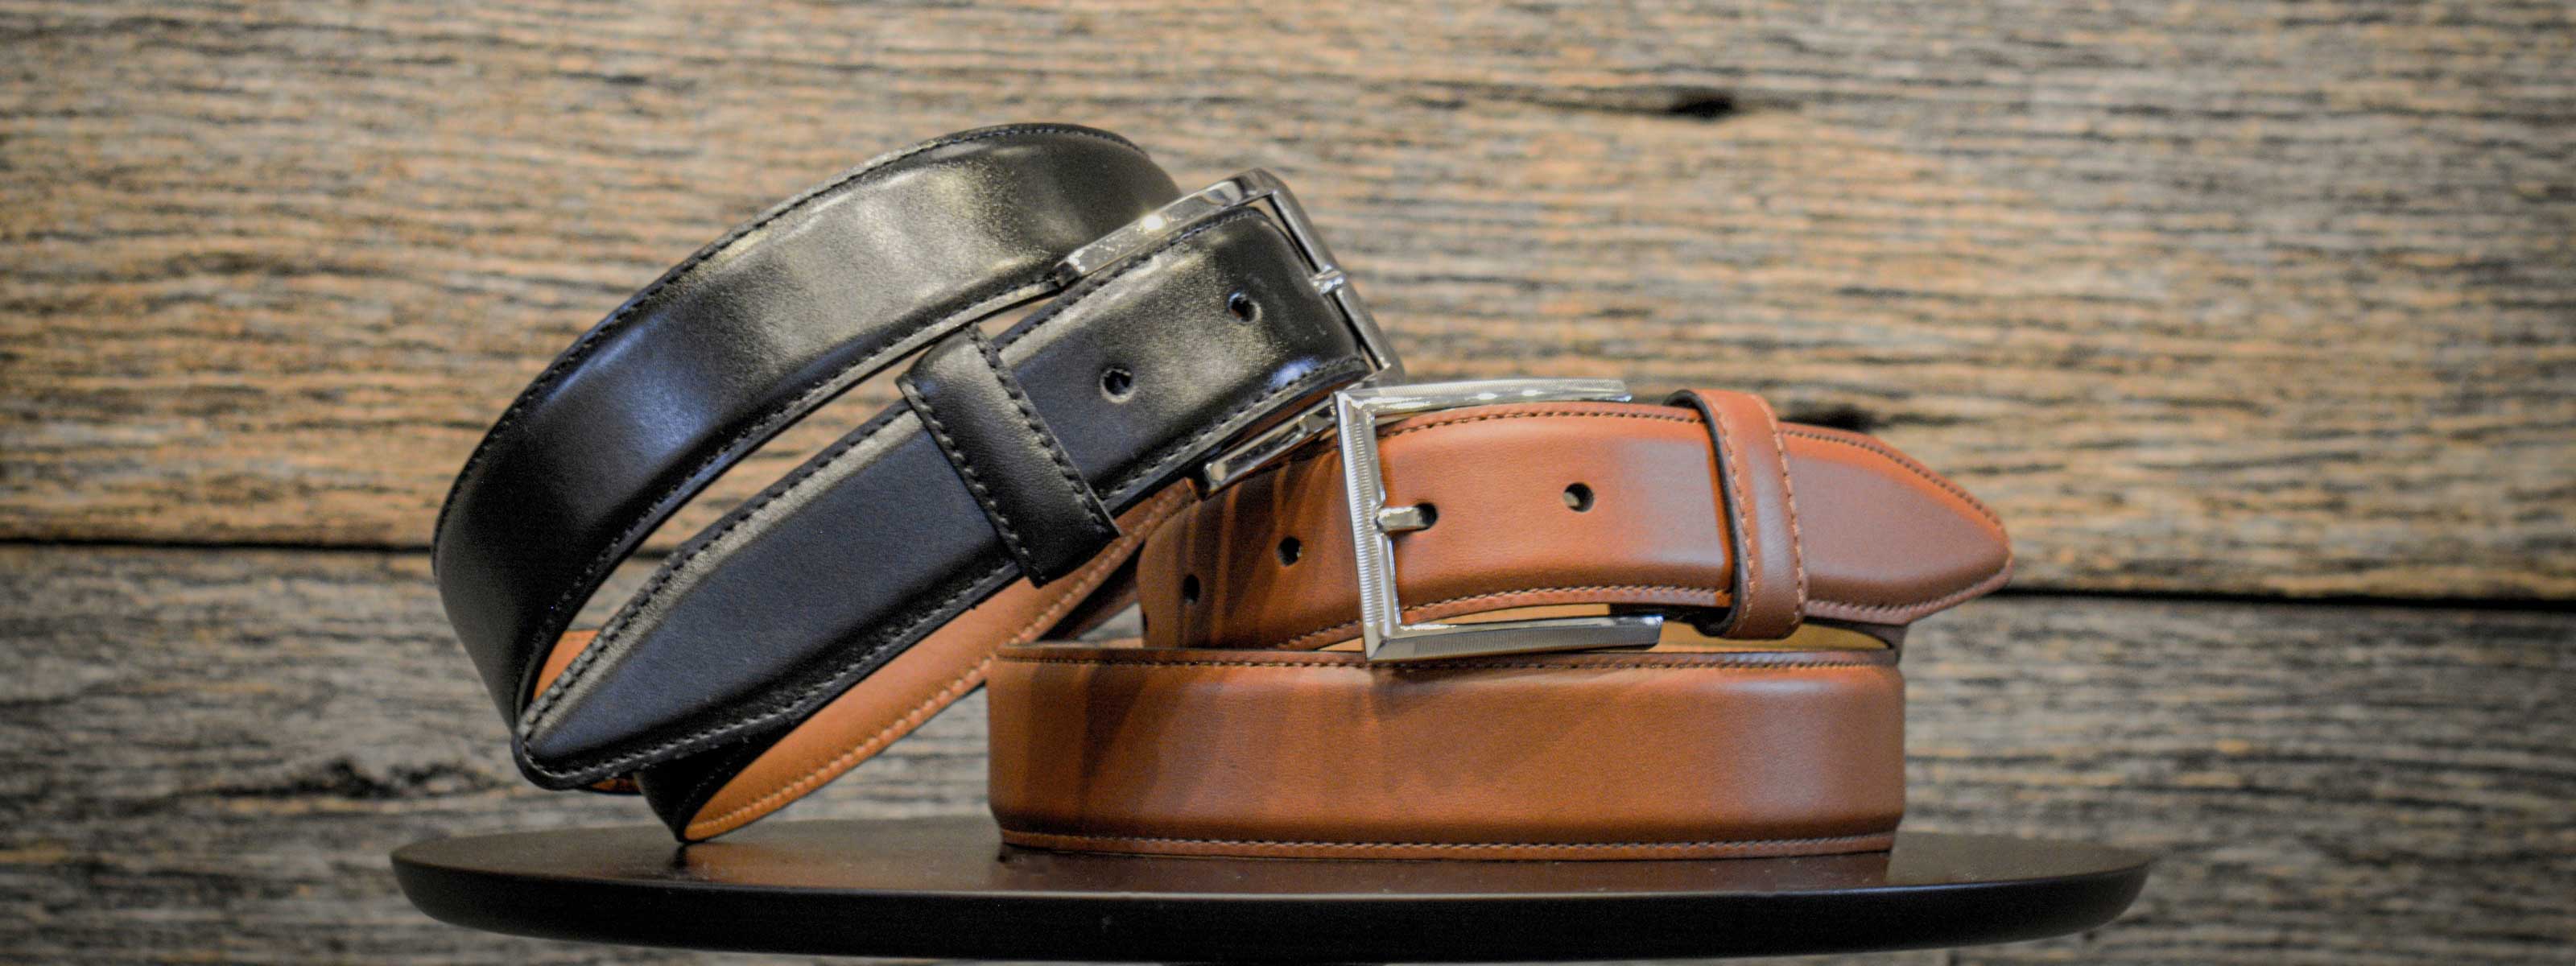 The Perfect Accessory for Every Outfit: Lejon Dress Belts